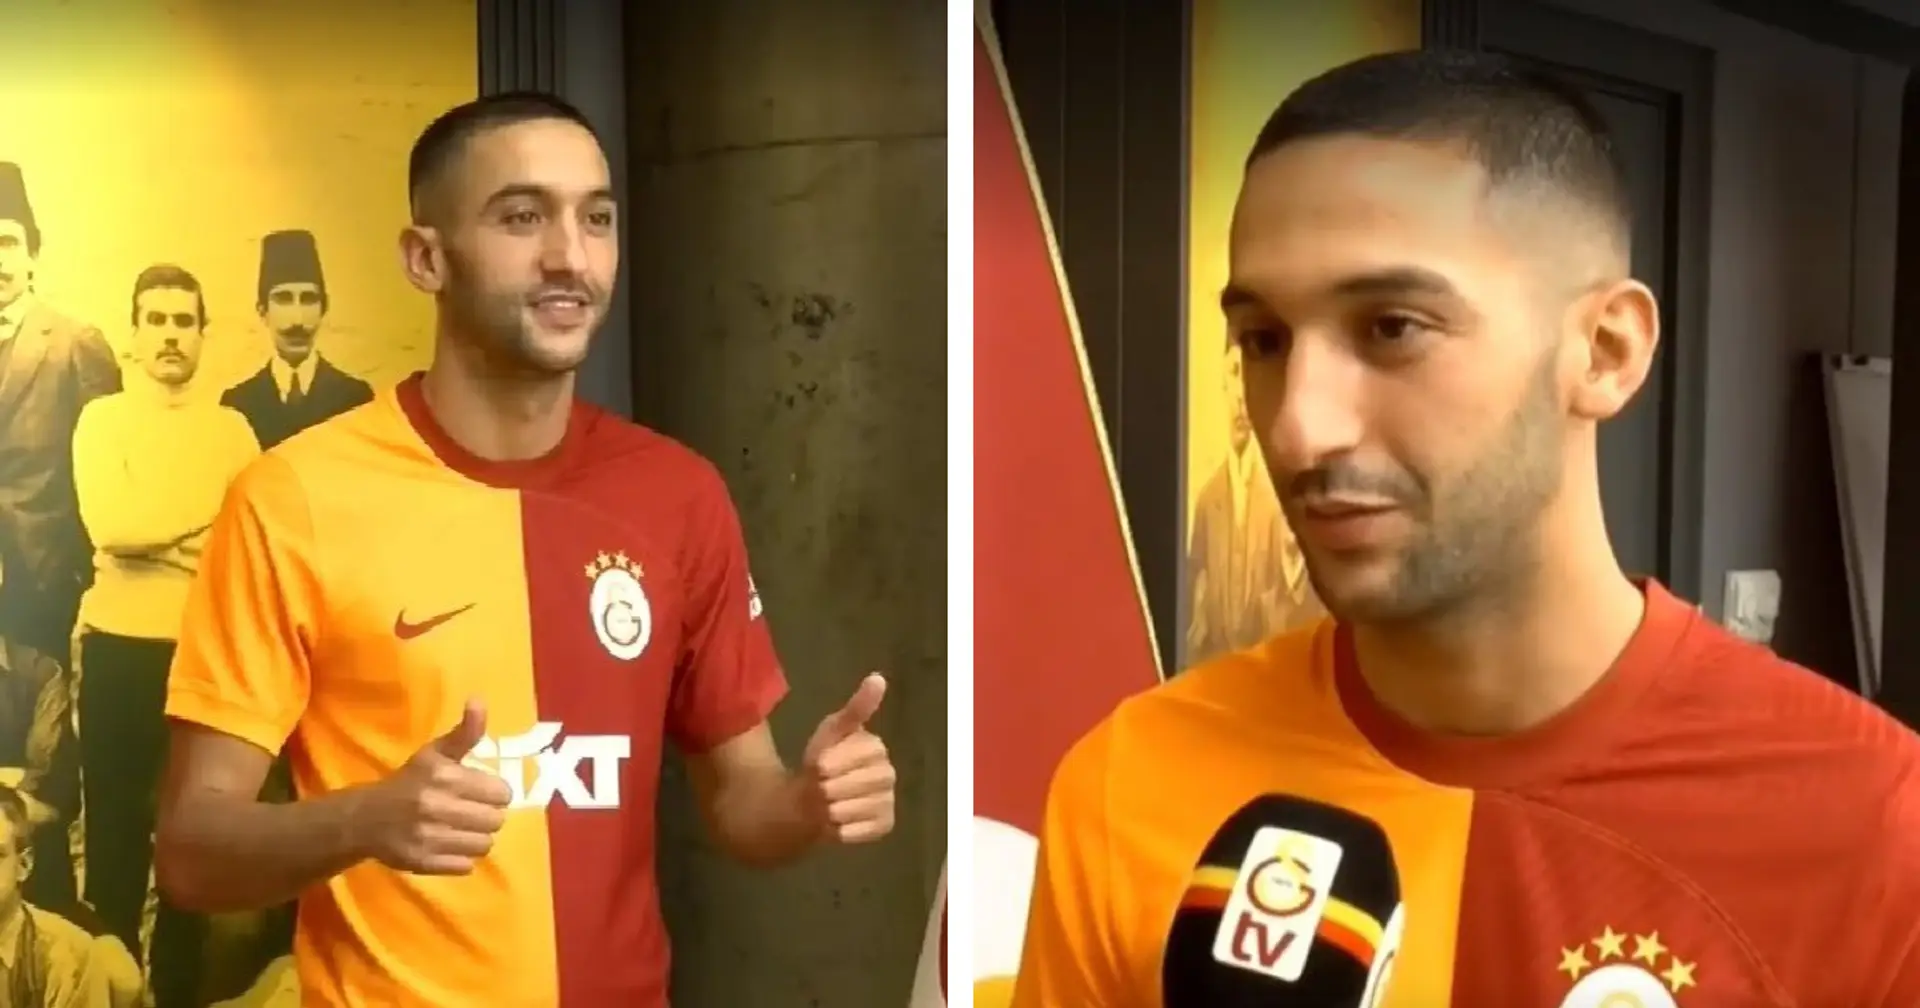 Hakim Ziyech unveiled as Galatasaray player - but there's a catch